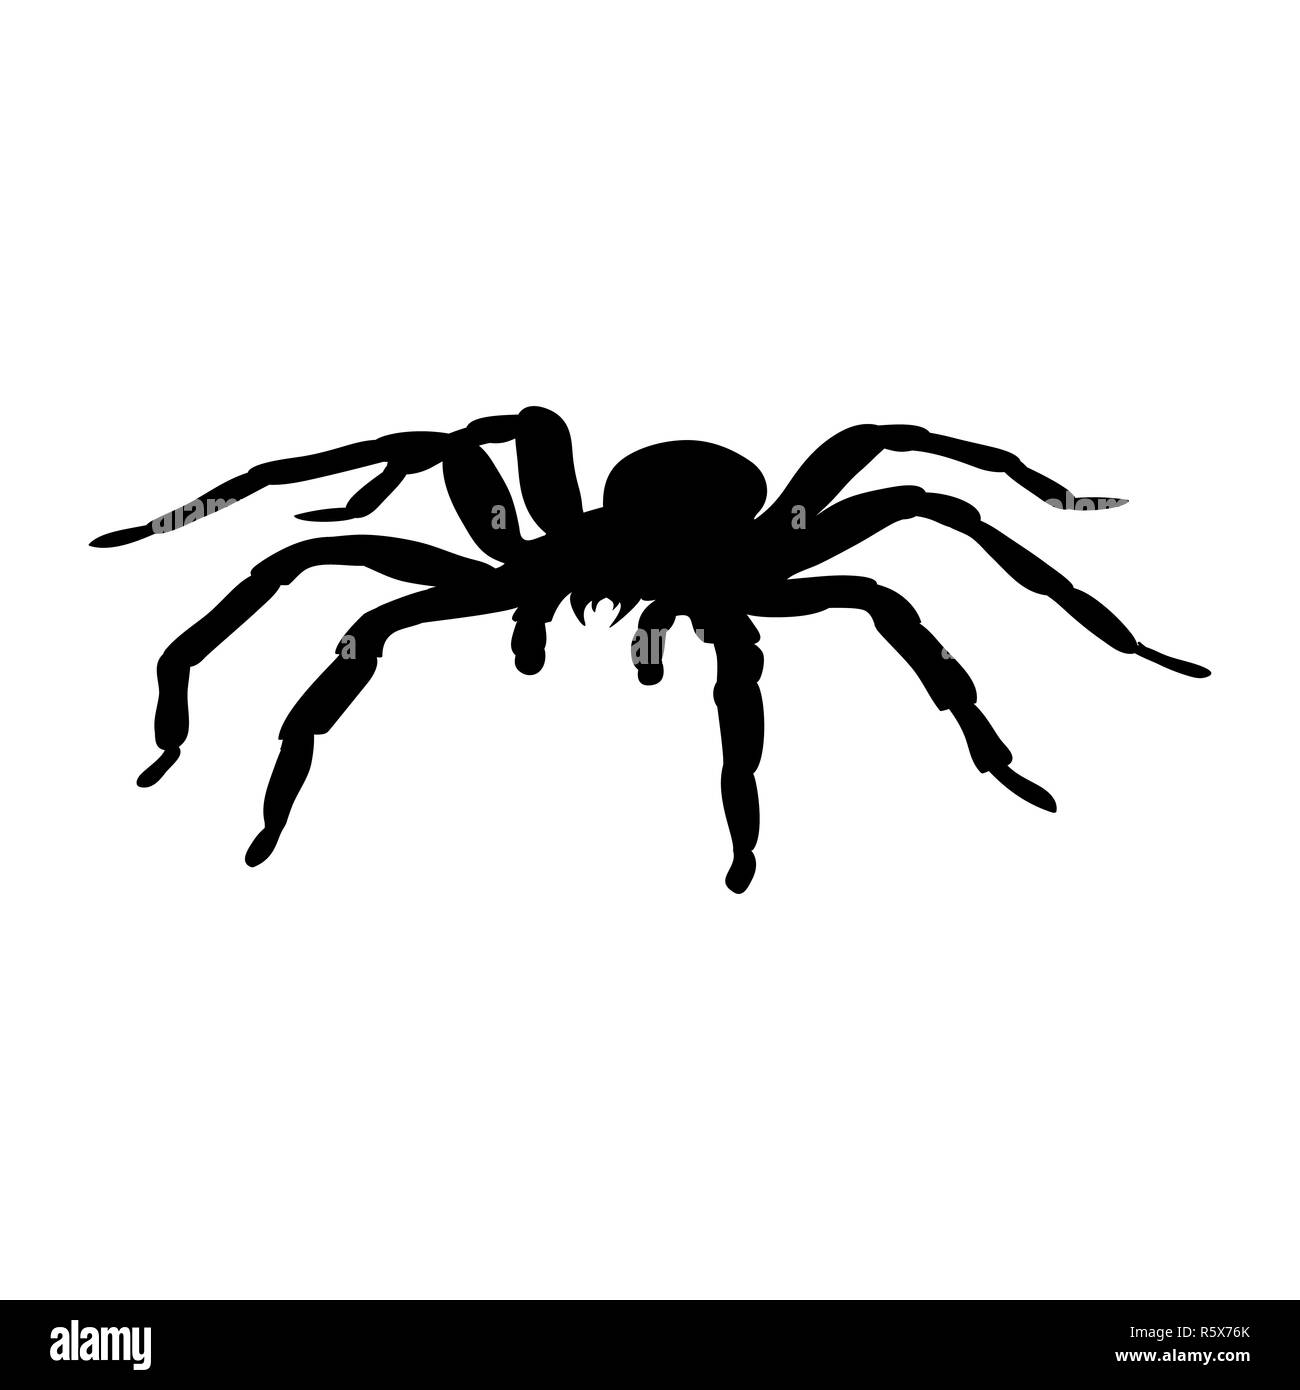 Spider monster silhouette ancient mythology fantasy Stock Photo